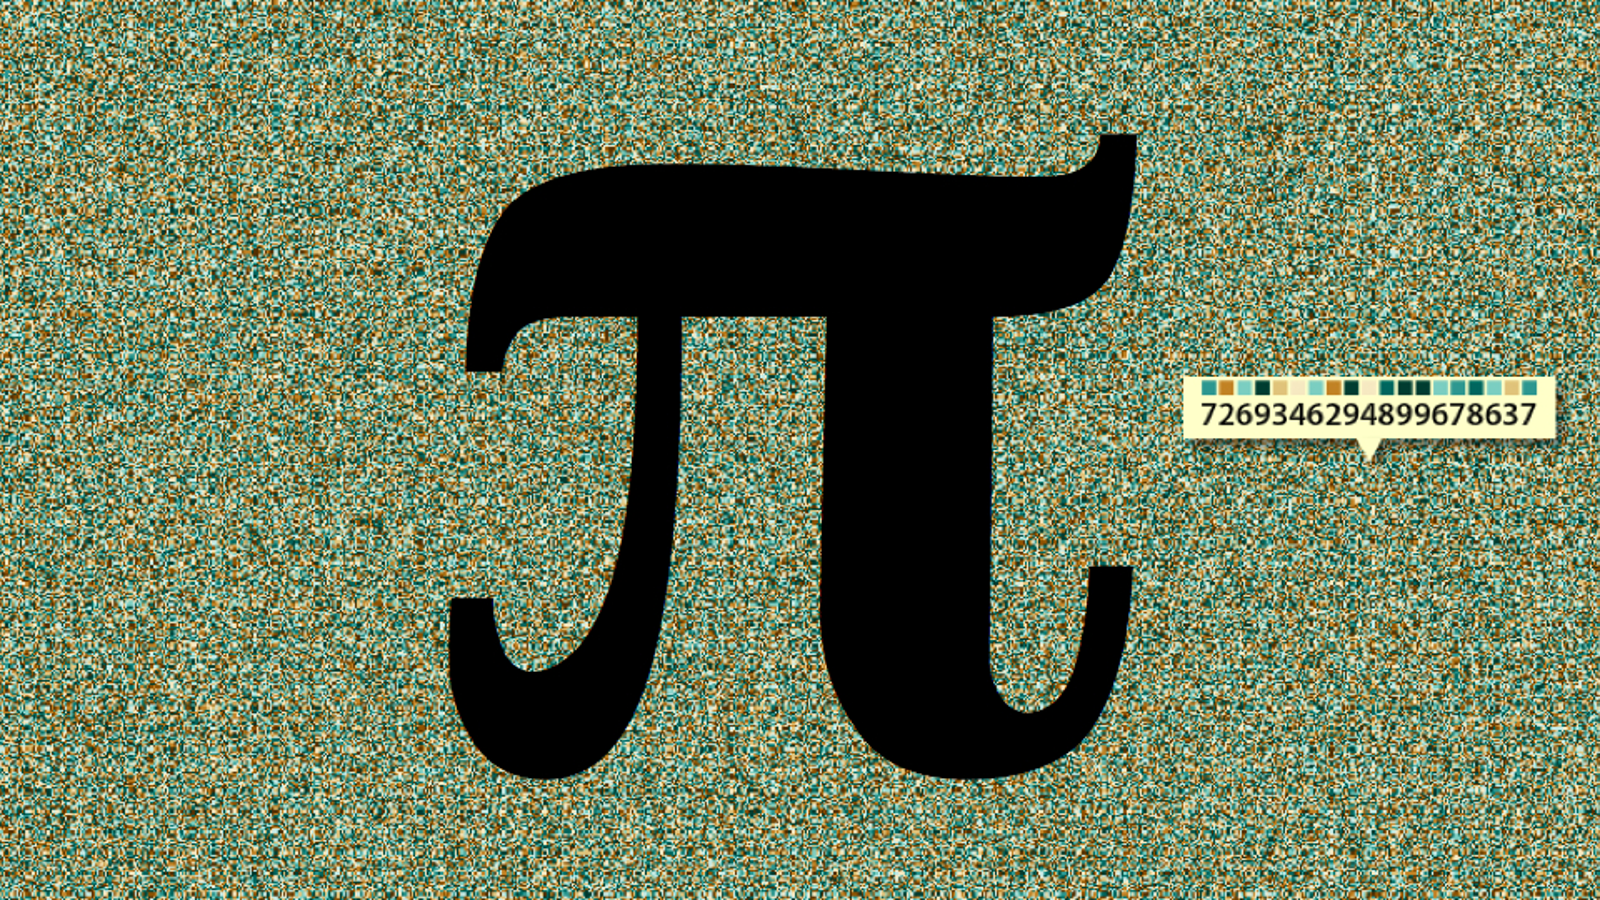 who was the first to calculate pi